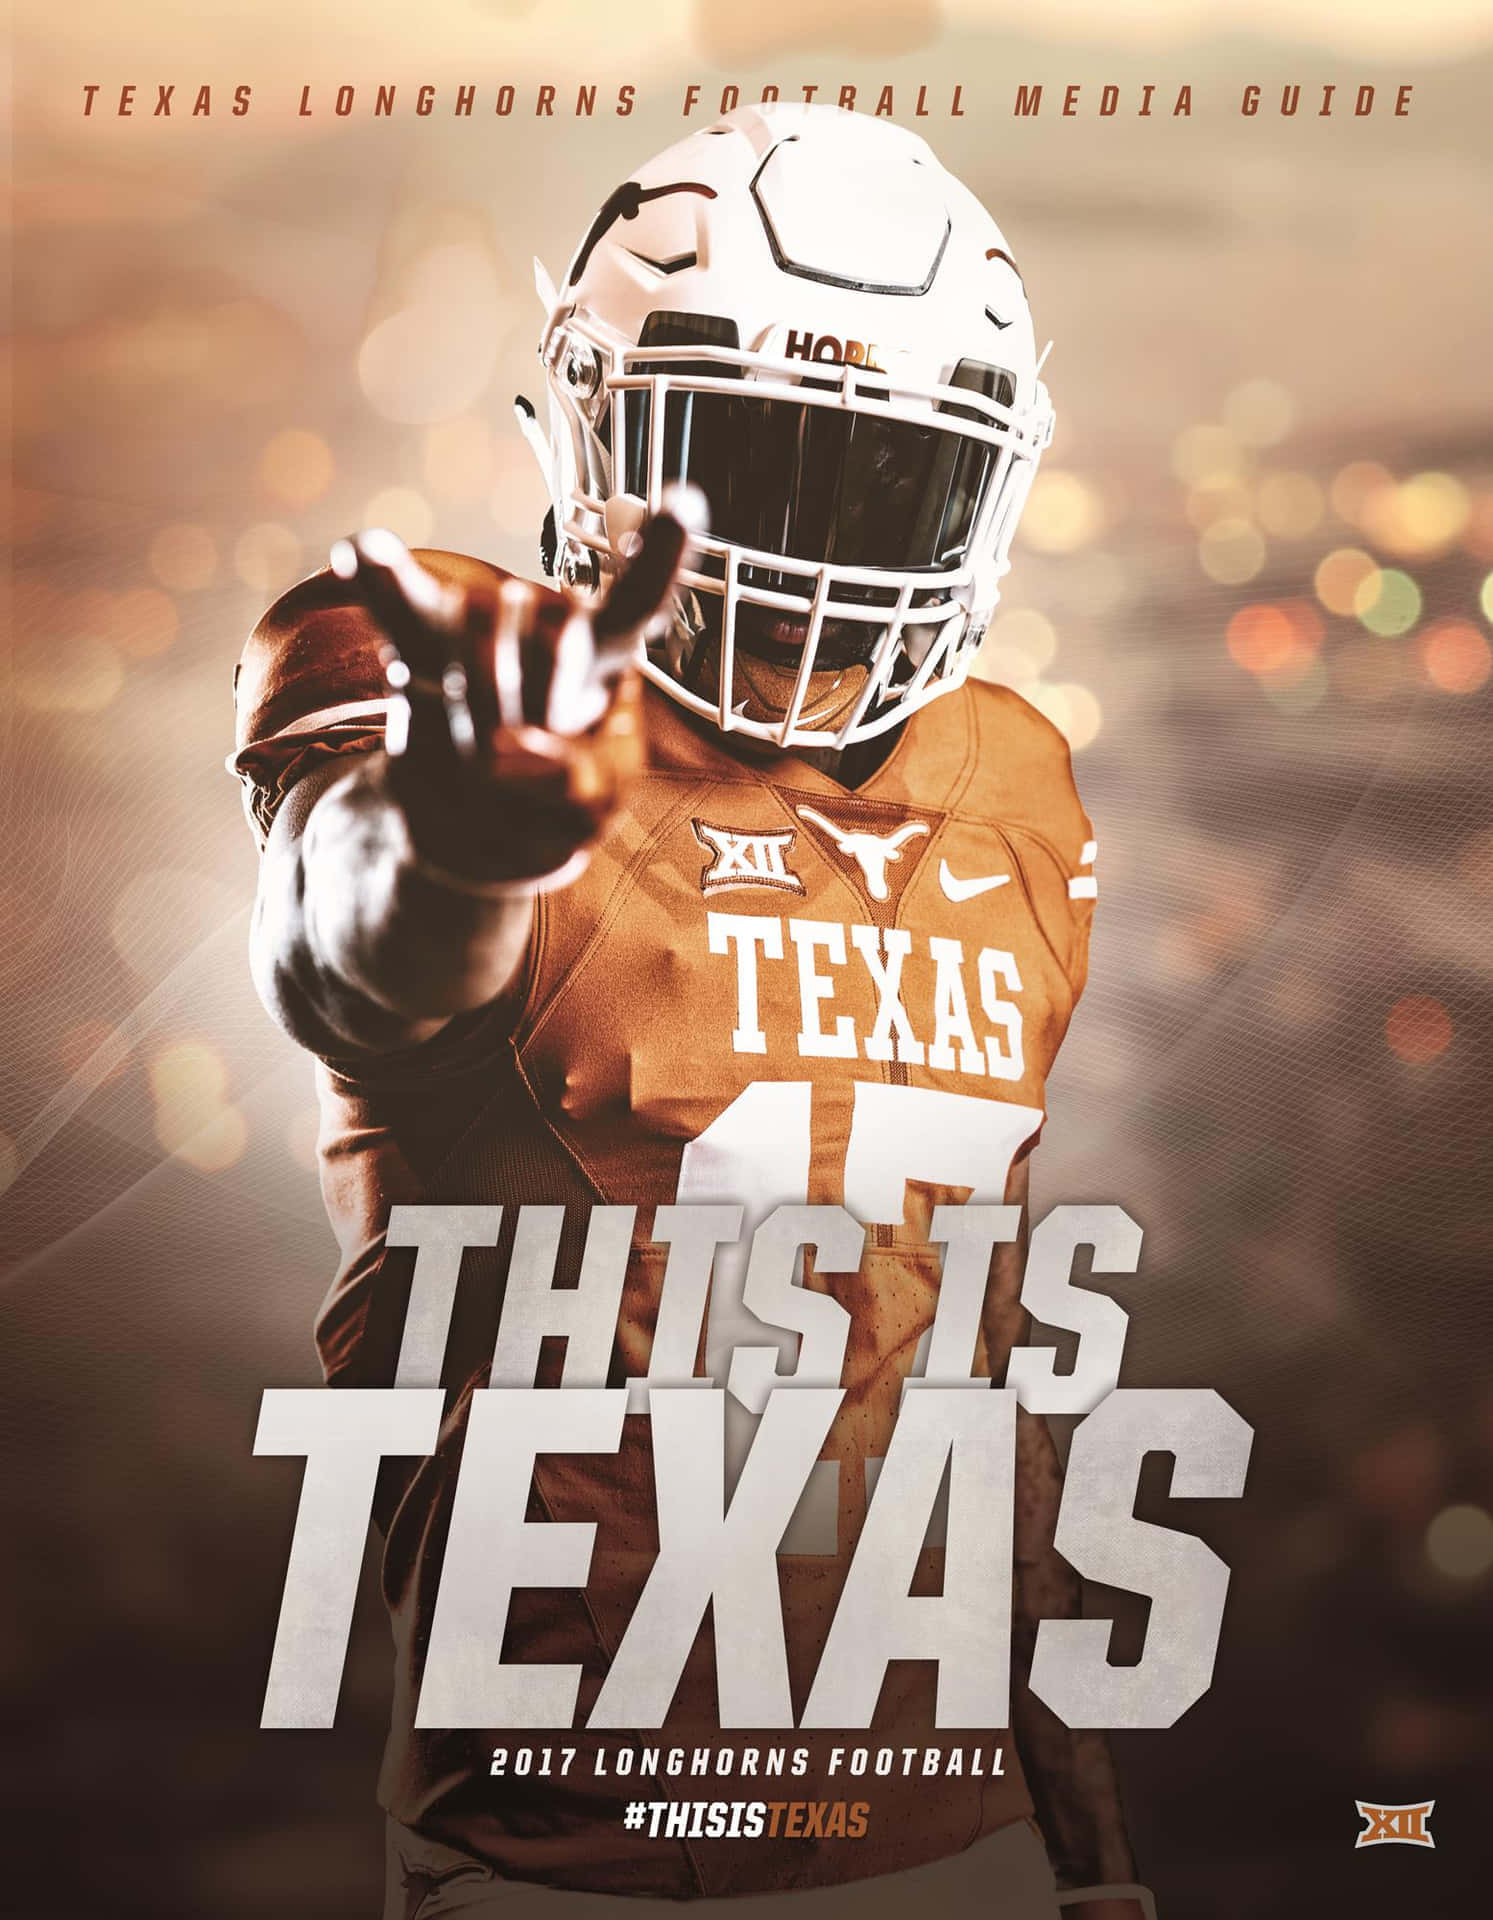 Get the latest tech right here in Texas! Wallpaper